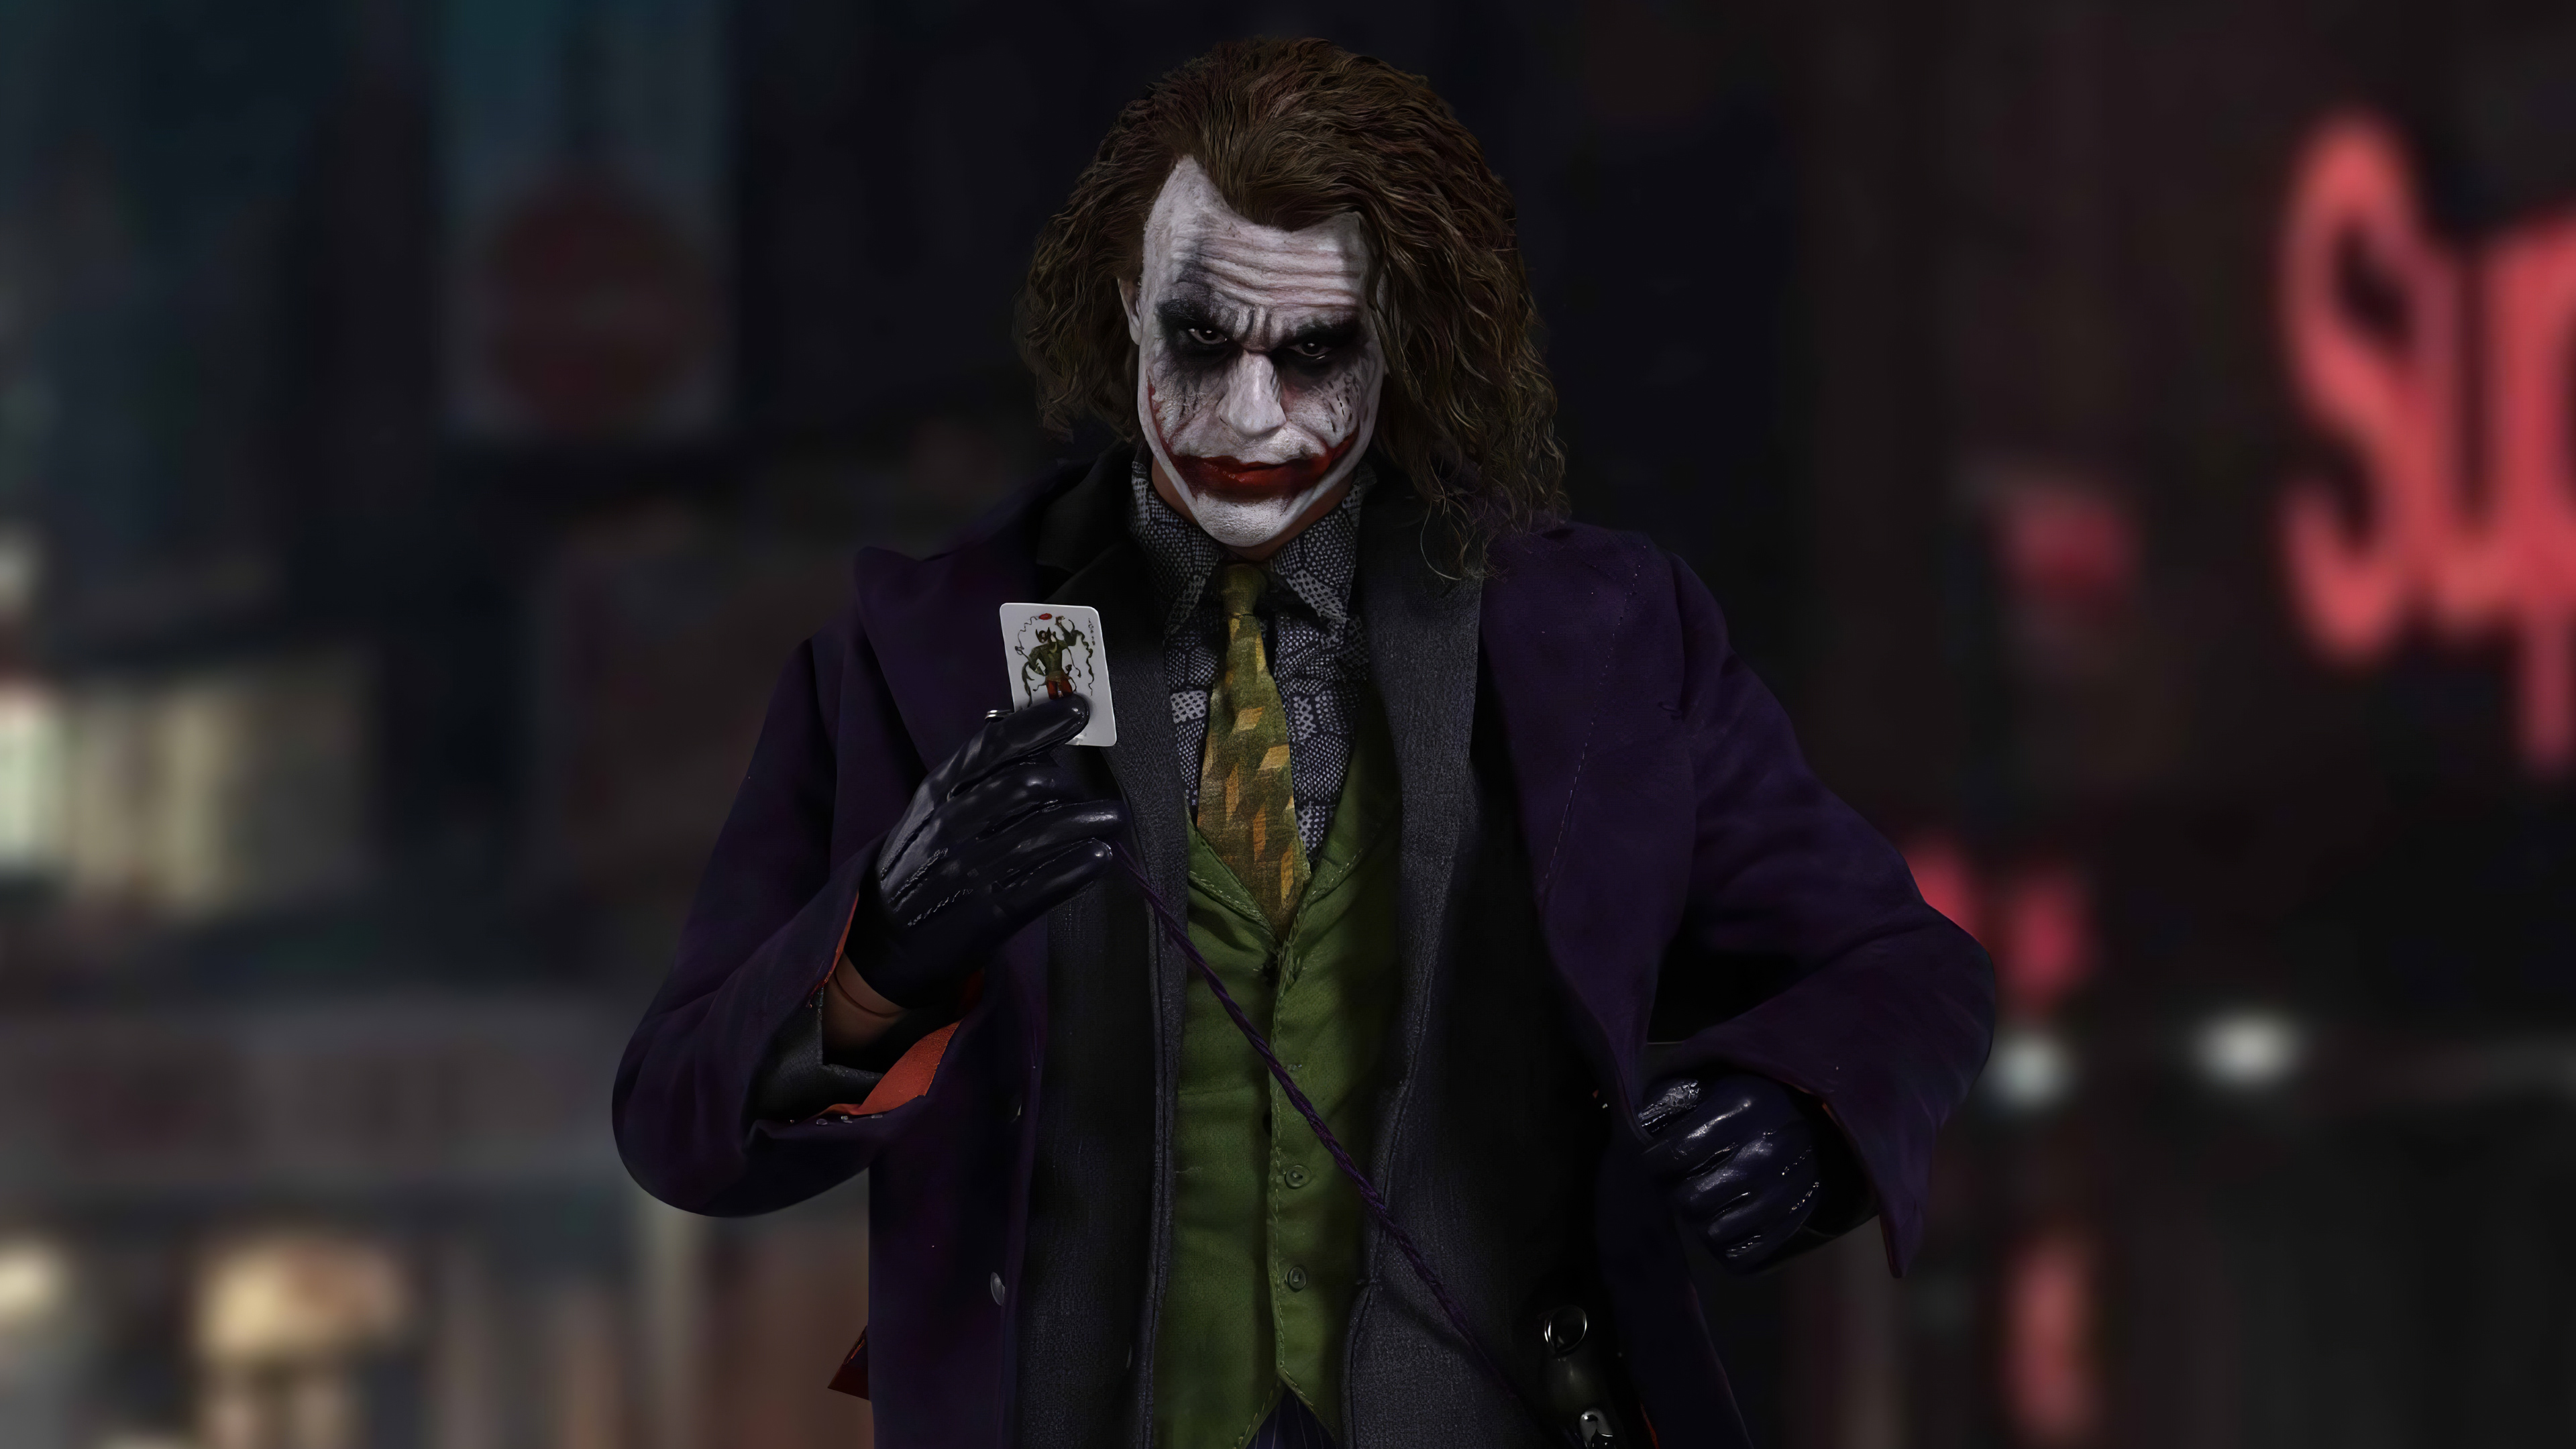 4k Joker 2020 Art, HD Superheroes, 4k Wallpapers, Images, Backgrounds,  Photos and Pictures